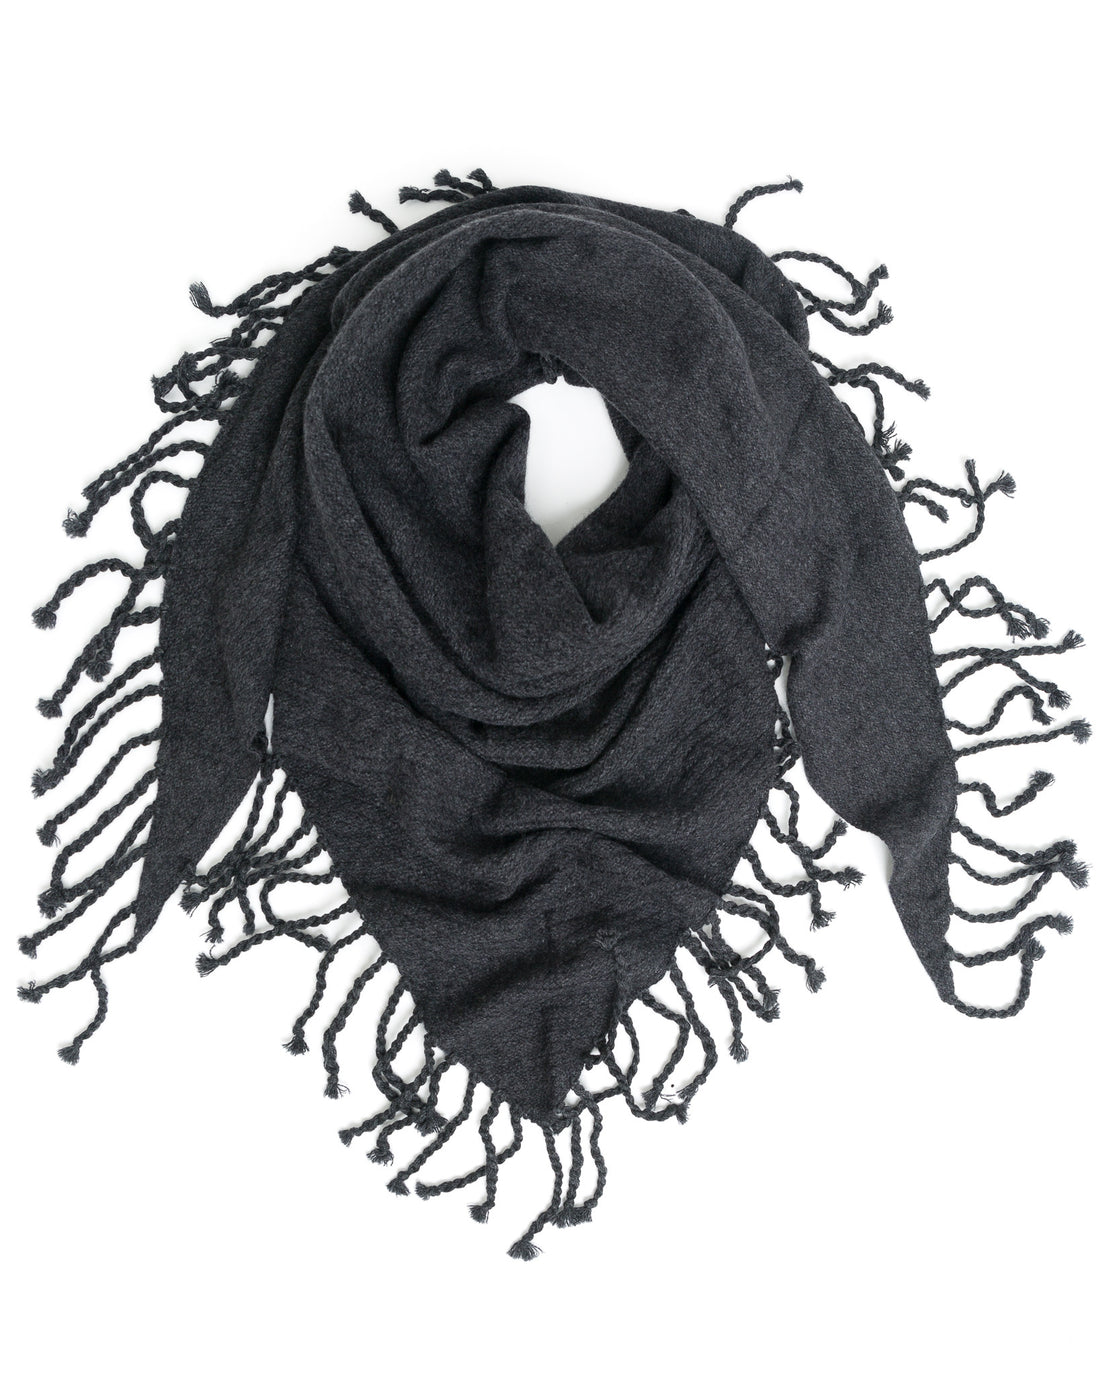 ACCESSORIES - On Dropped Needle Cashmere Shawl